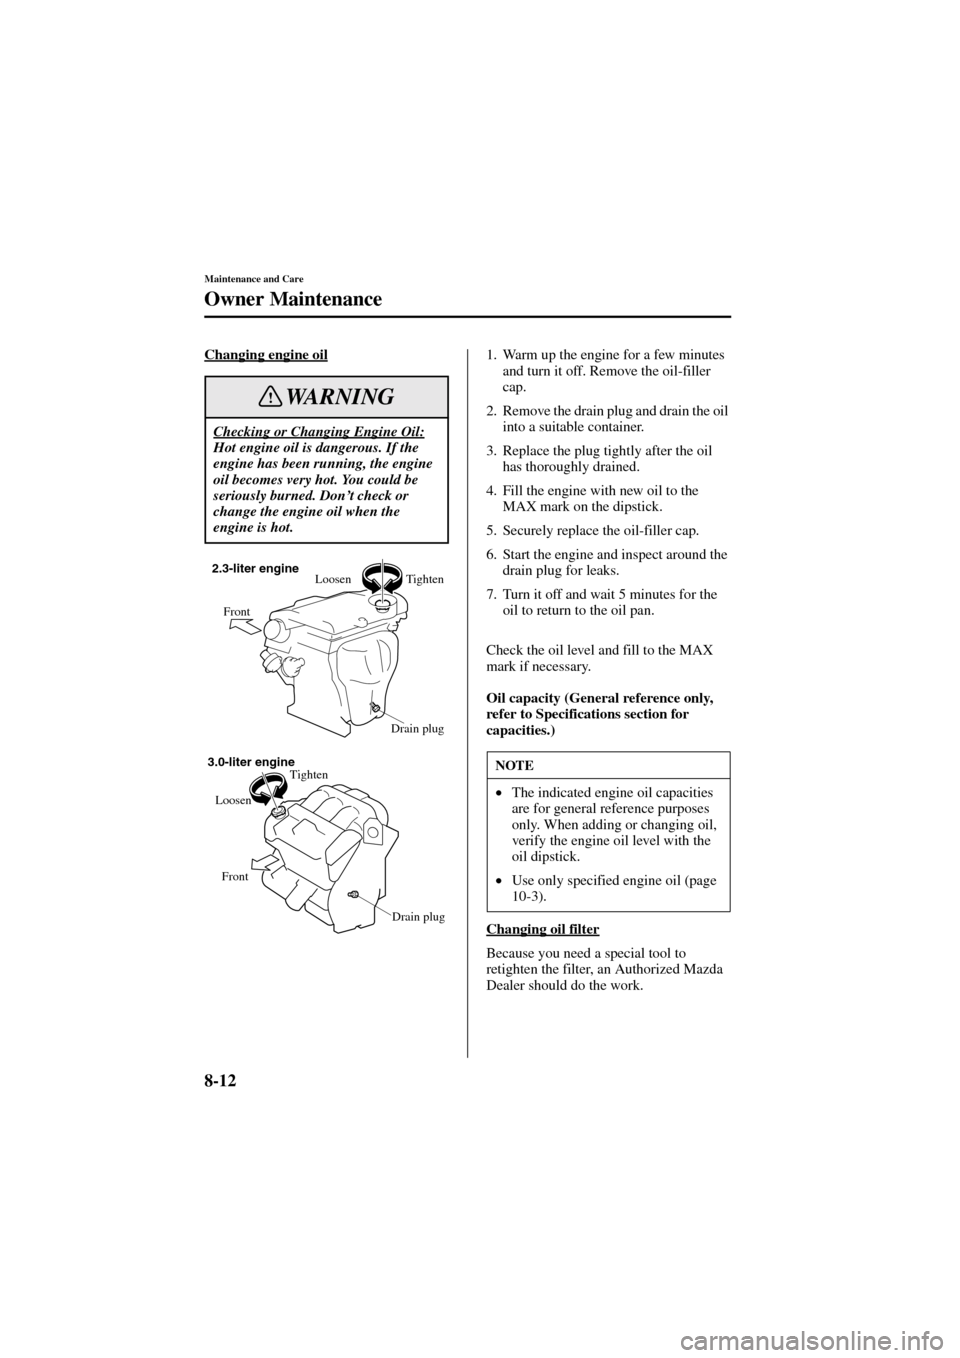 MAZDA MODEL 6 2004   (in English) Owners Manual 8-12
Maintenance and Care
Owner Maintenance
Form No. 8R29-EA-02I
Changing engine oil1. Warm up the engine for a few minutes 
and turn it off. Remove the oil-filler 
cap.
2. Remove the drain plug and d